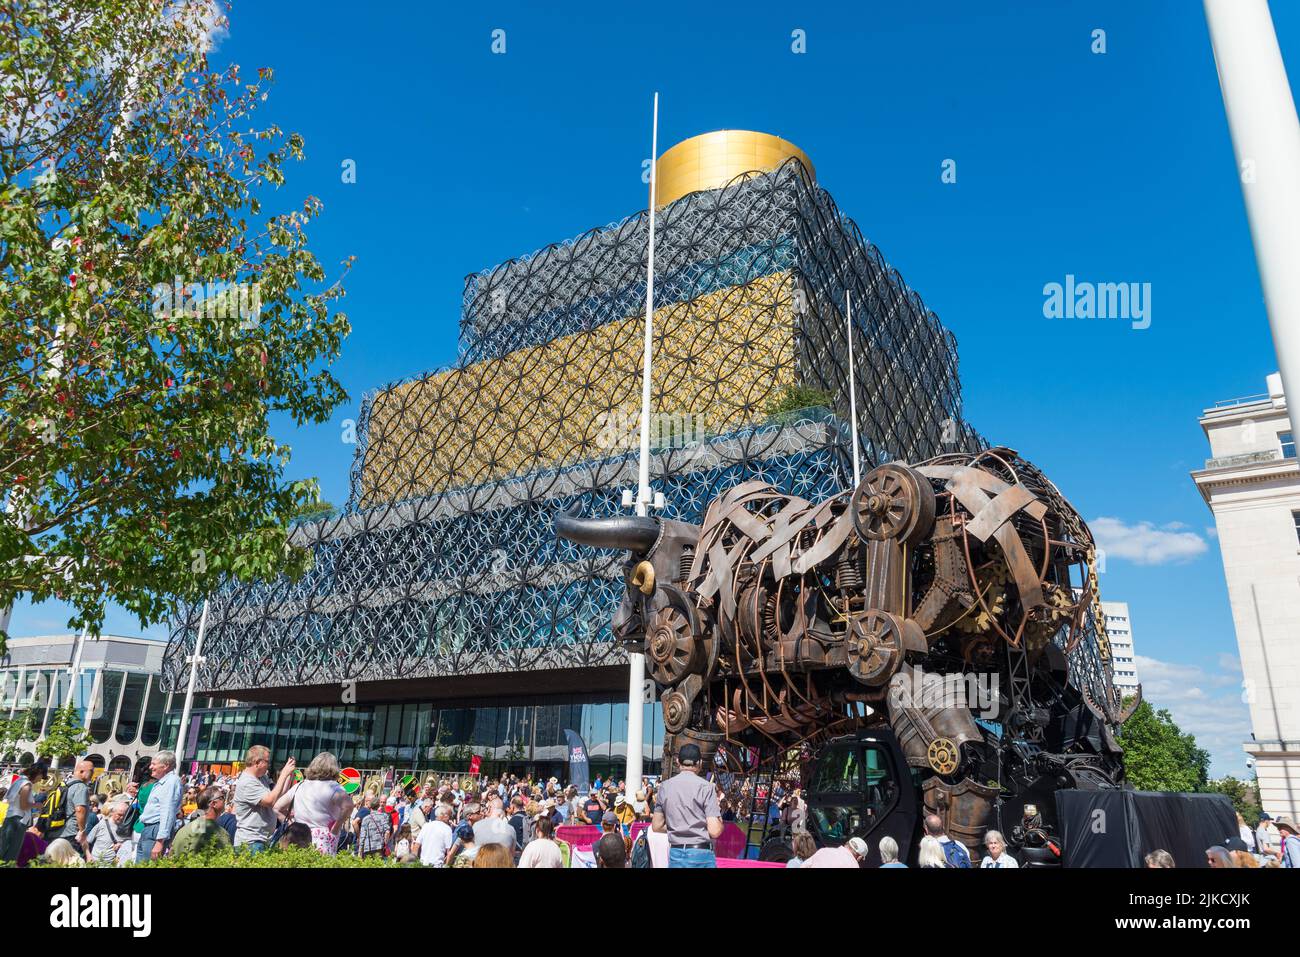 Crowds of visitors in Birmingham for the 2022 Commonwealth Games viewing the Bull that featured in the opening ceremony Stock Photo